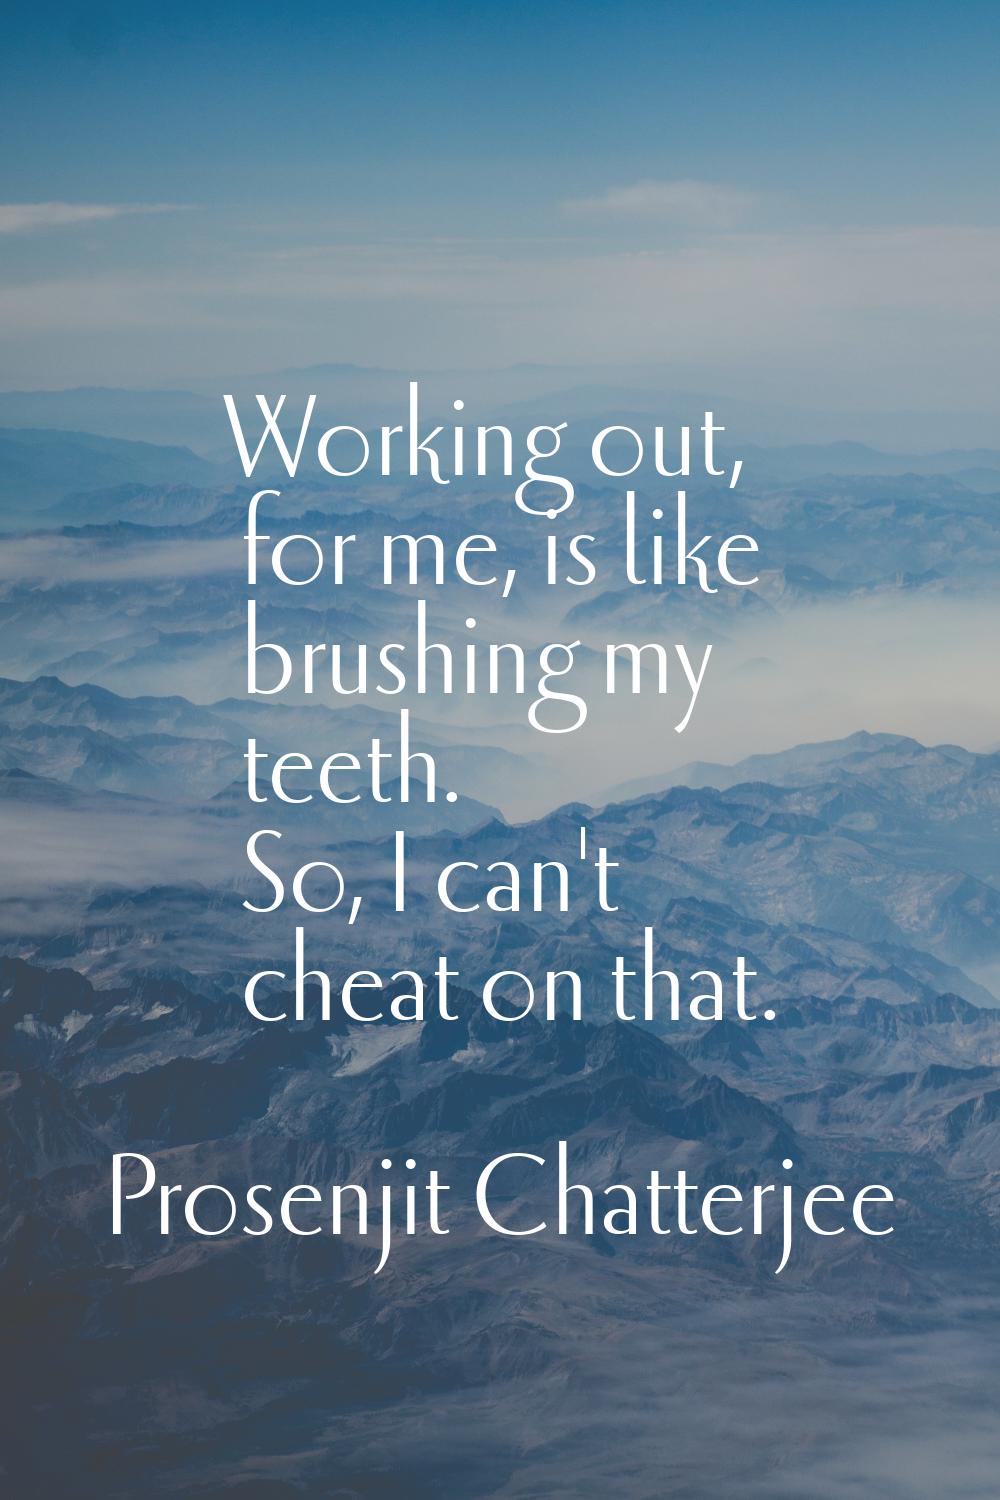 Working out, for me, is like brushing my teeth. So, I can't cheat on that.